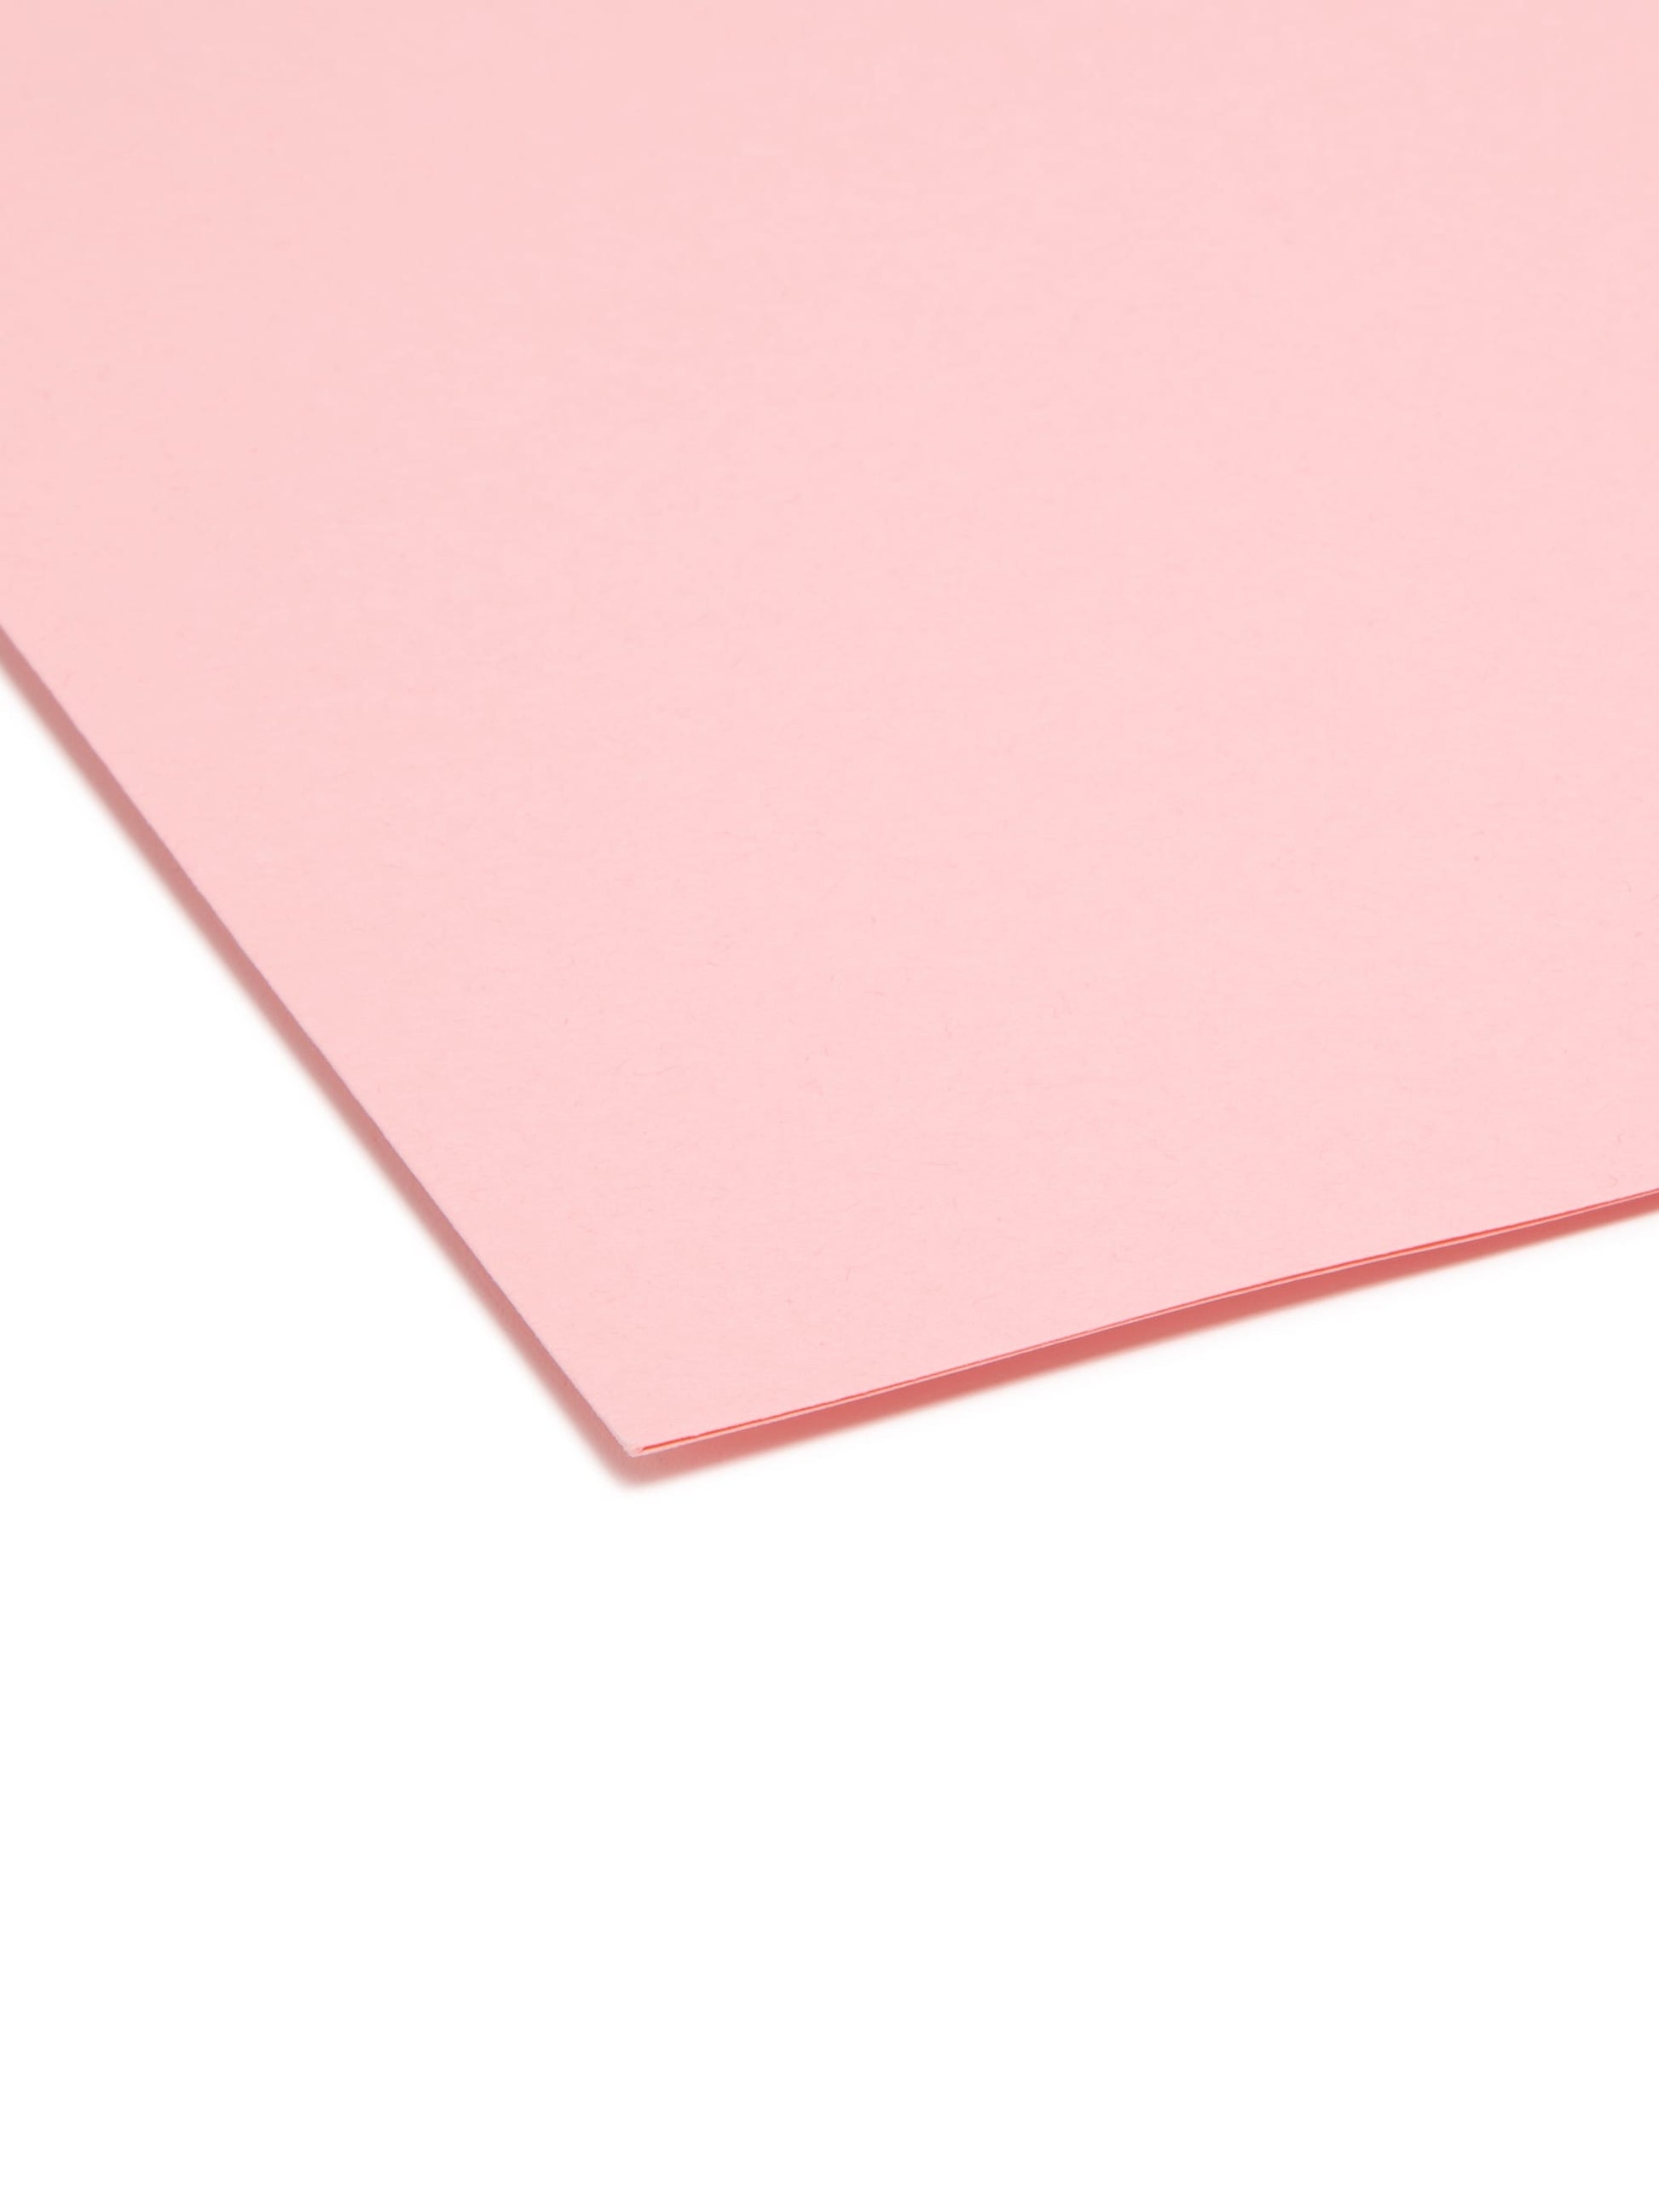 Reinforced Tab File Folders, Straight-Cut Tab, Pink Color, Letter Size, Set of 100, 086486126106